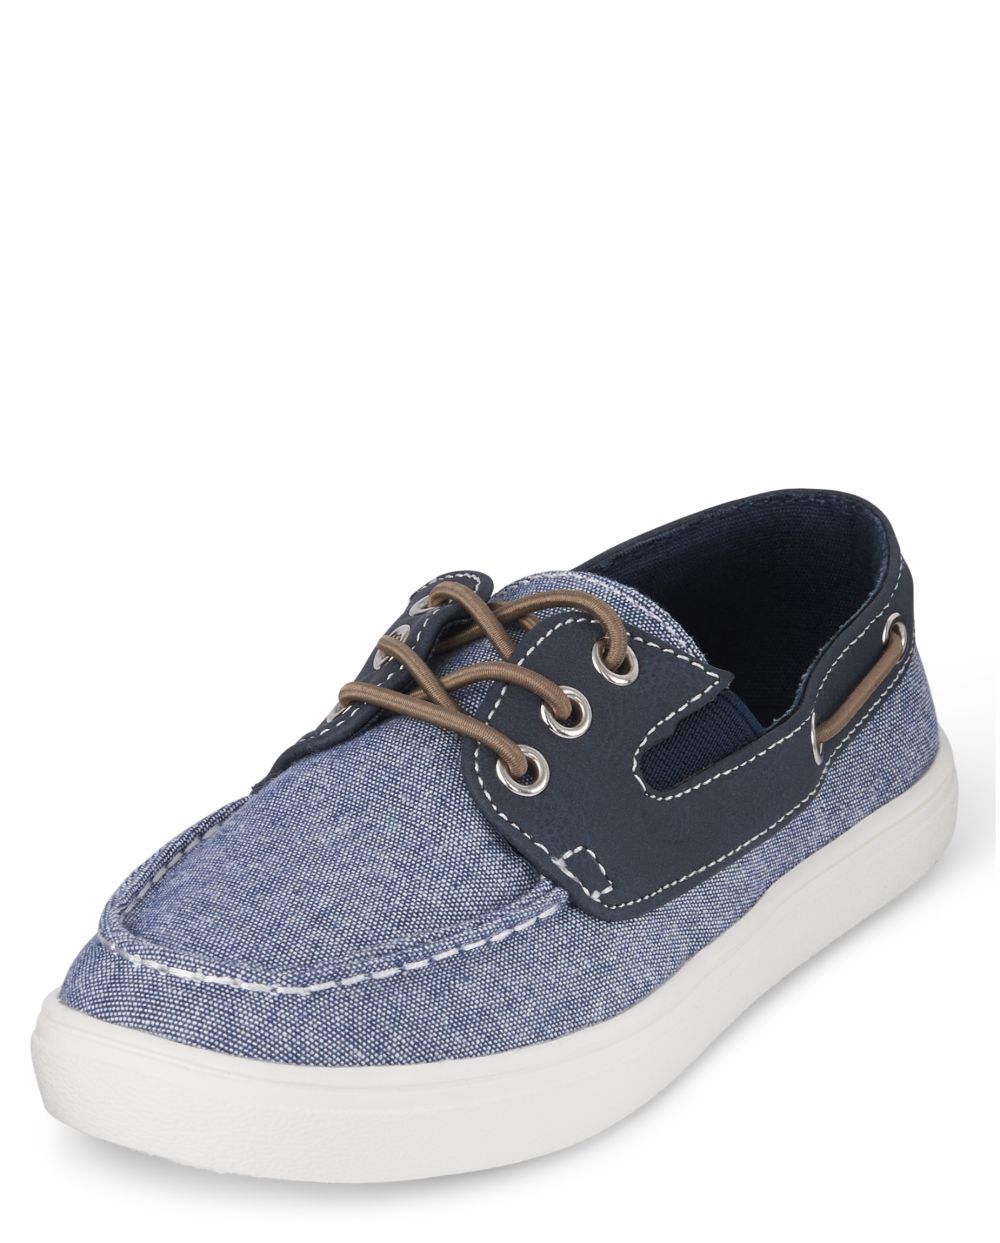 

Boys Boys Chambray Boat Shoes - Blue - The Children's Place